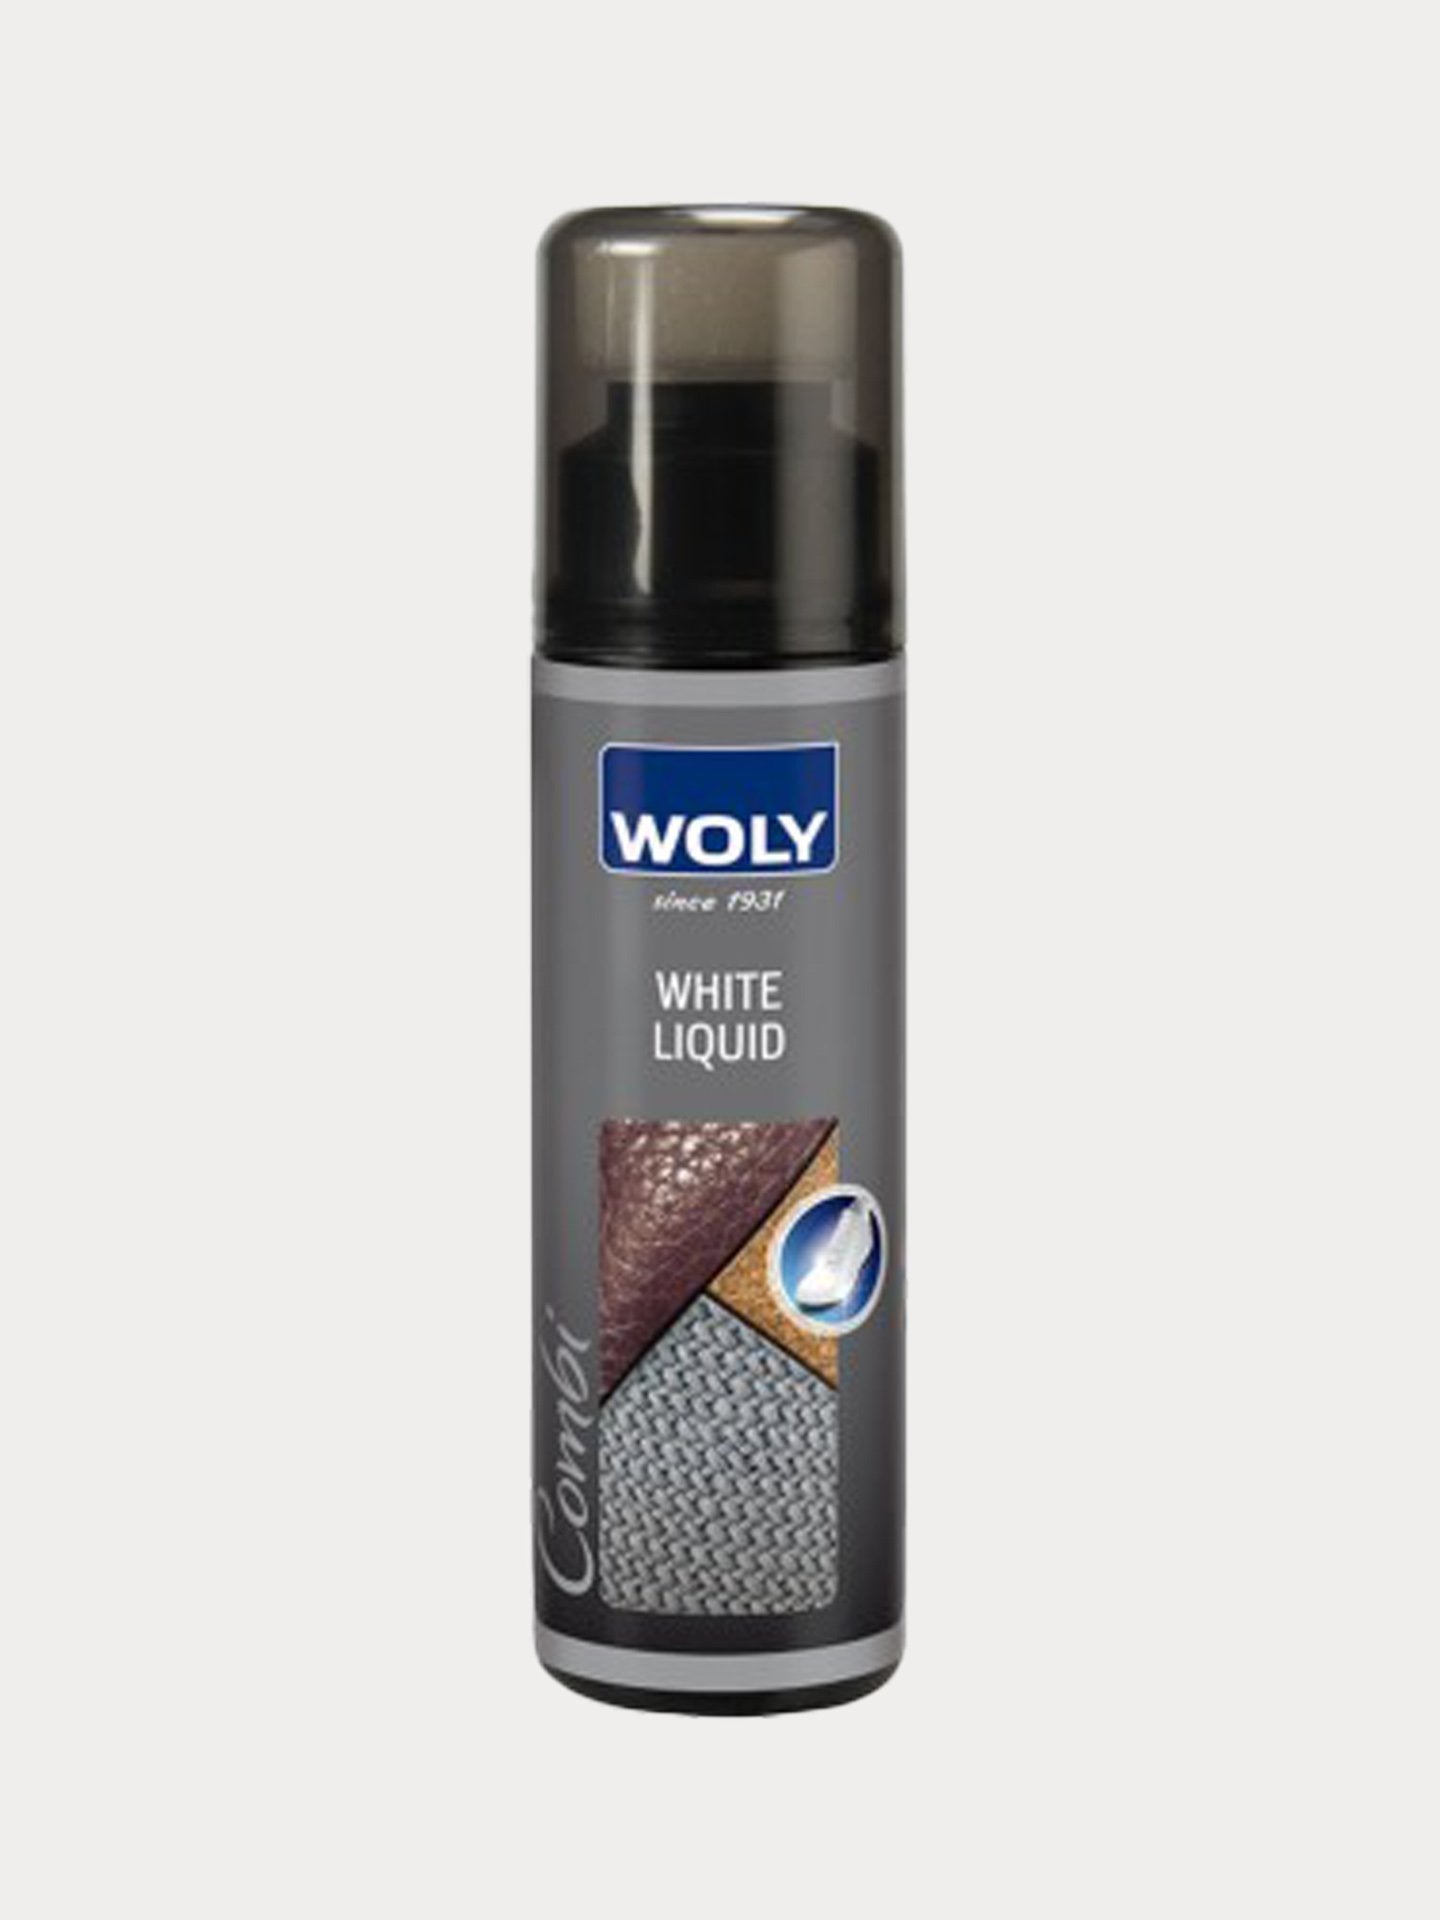 Woly White Liquid Polish for Neutral Leather